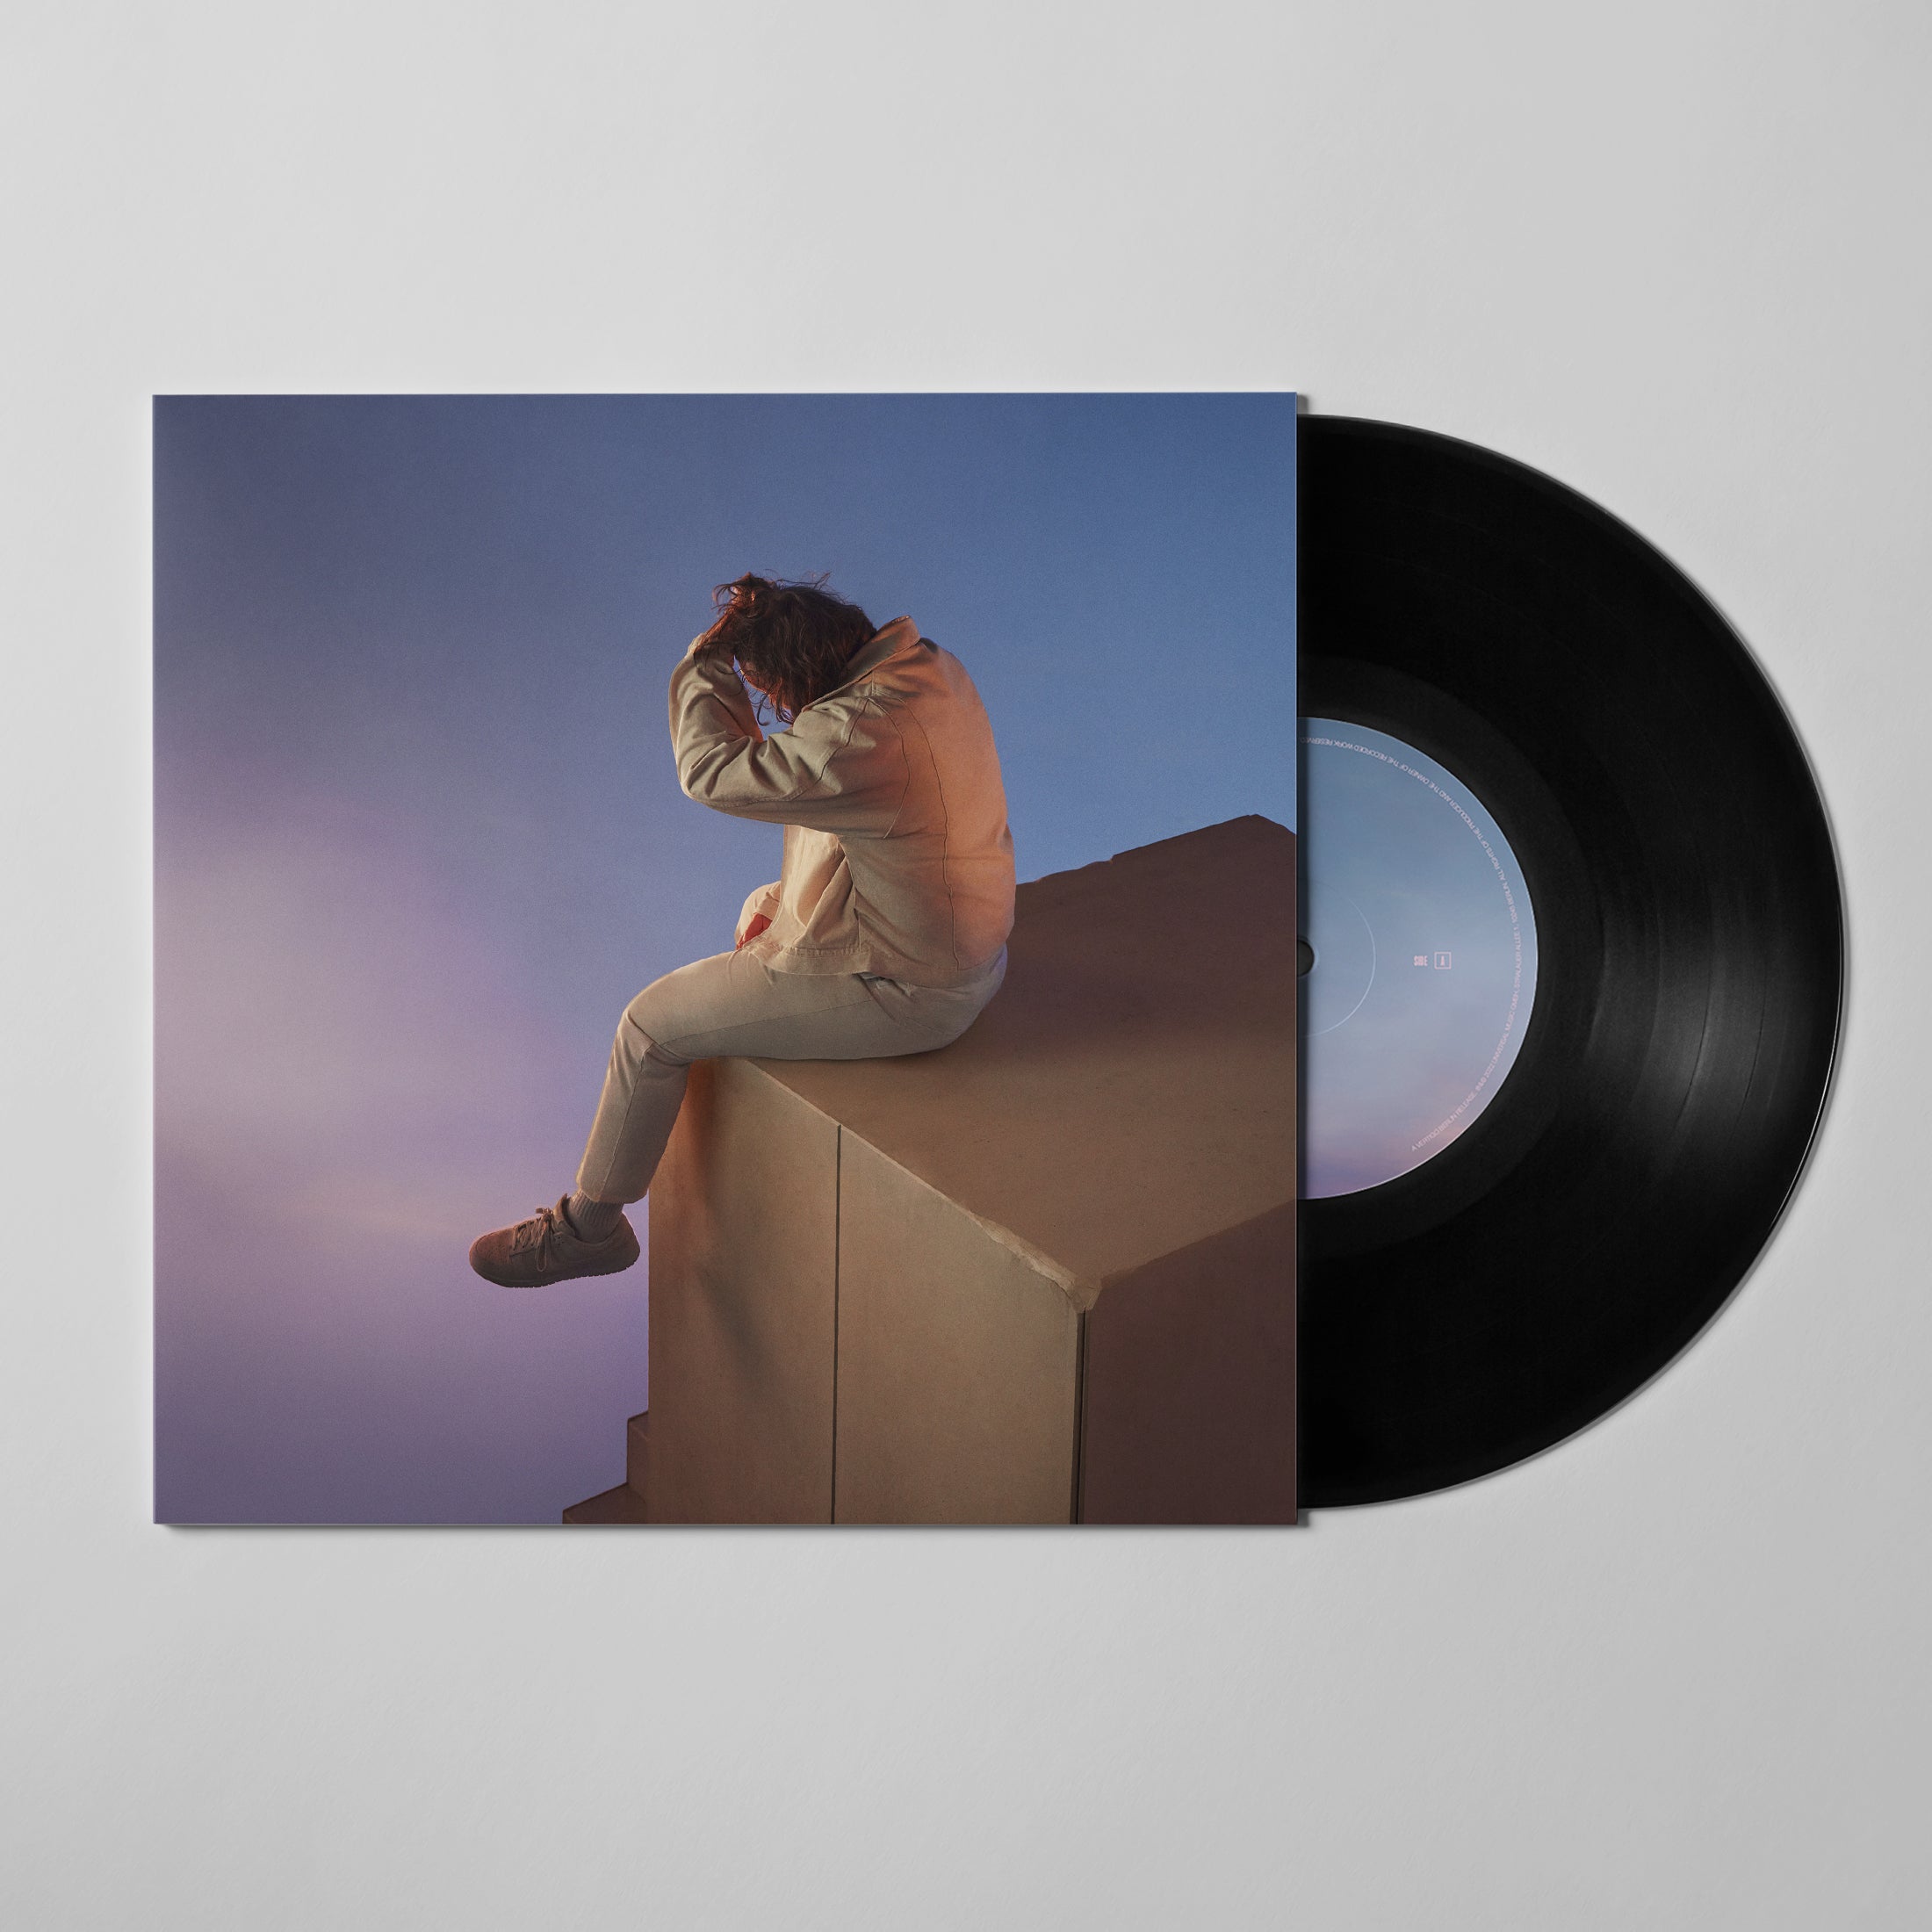 ‘Wish You The Best’ Limited Edition 7” Vinyl Single - Lewis Capaldi